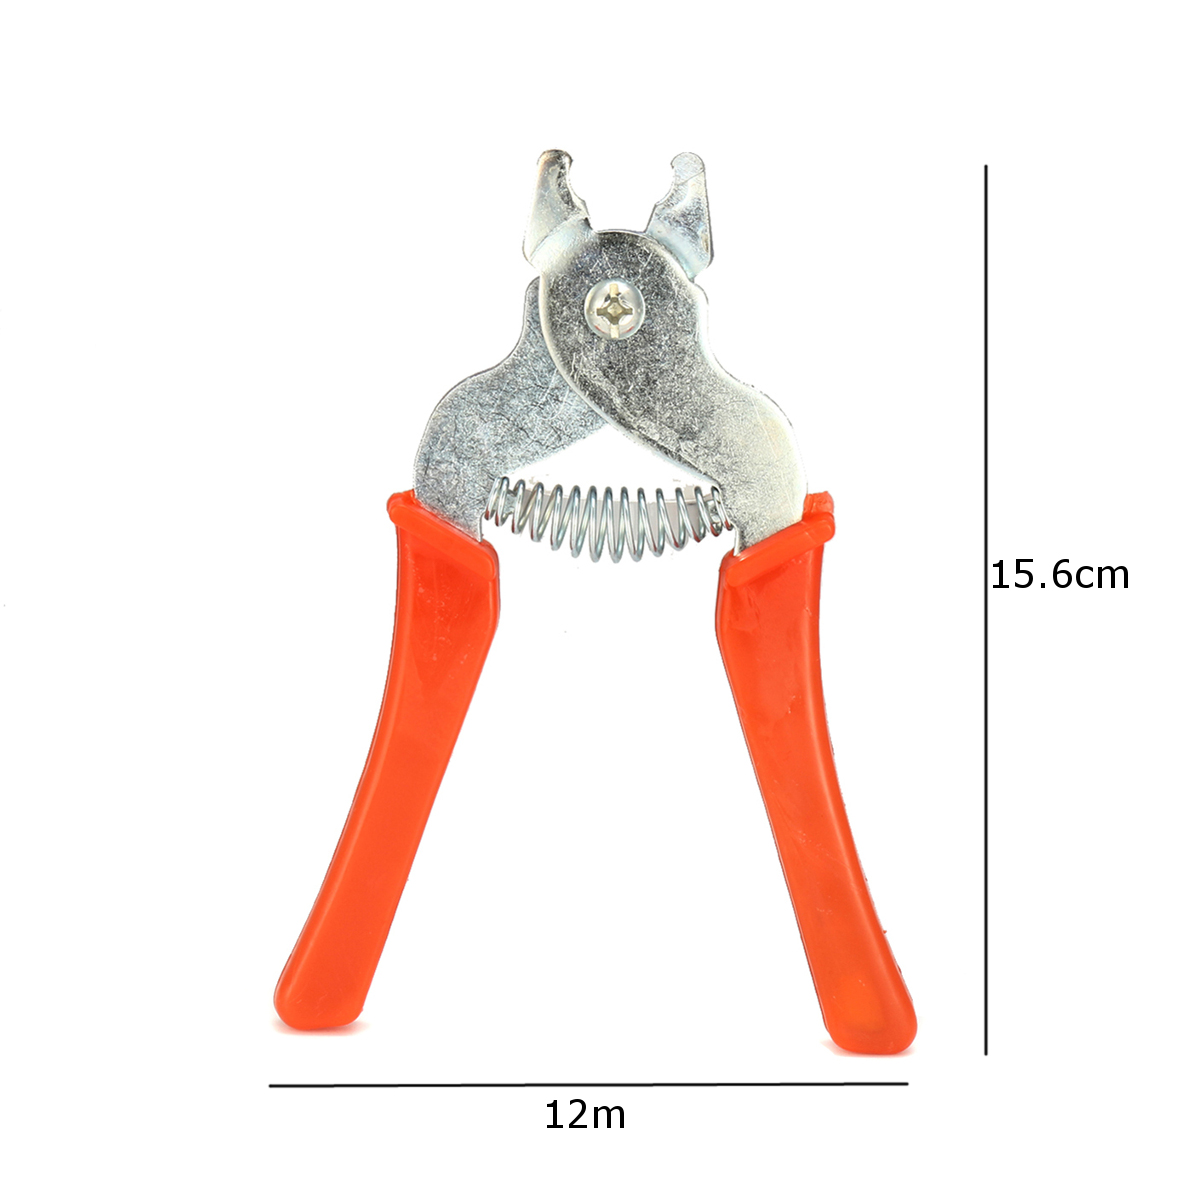 Hog-Ring-Pliers-Tool-M-Clip-Staples-Bird-Chicken-Mesh-Cage-Wire-Fencing-Netting-1316667-1